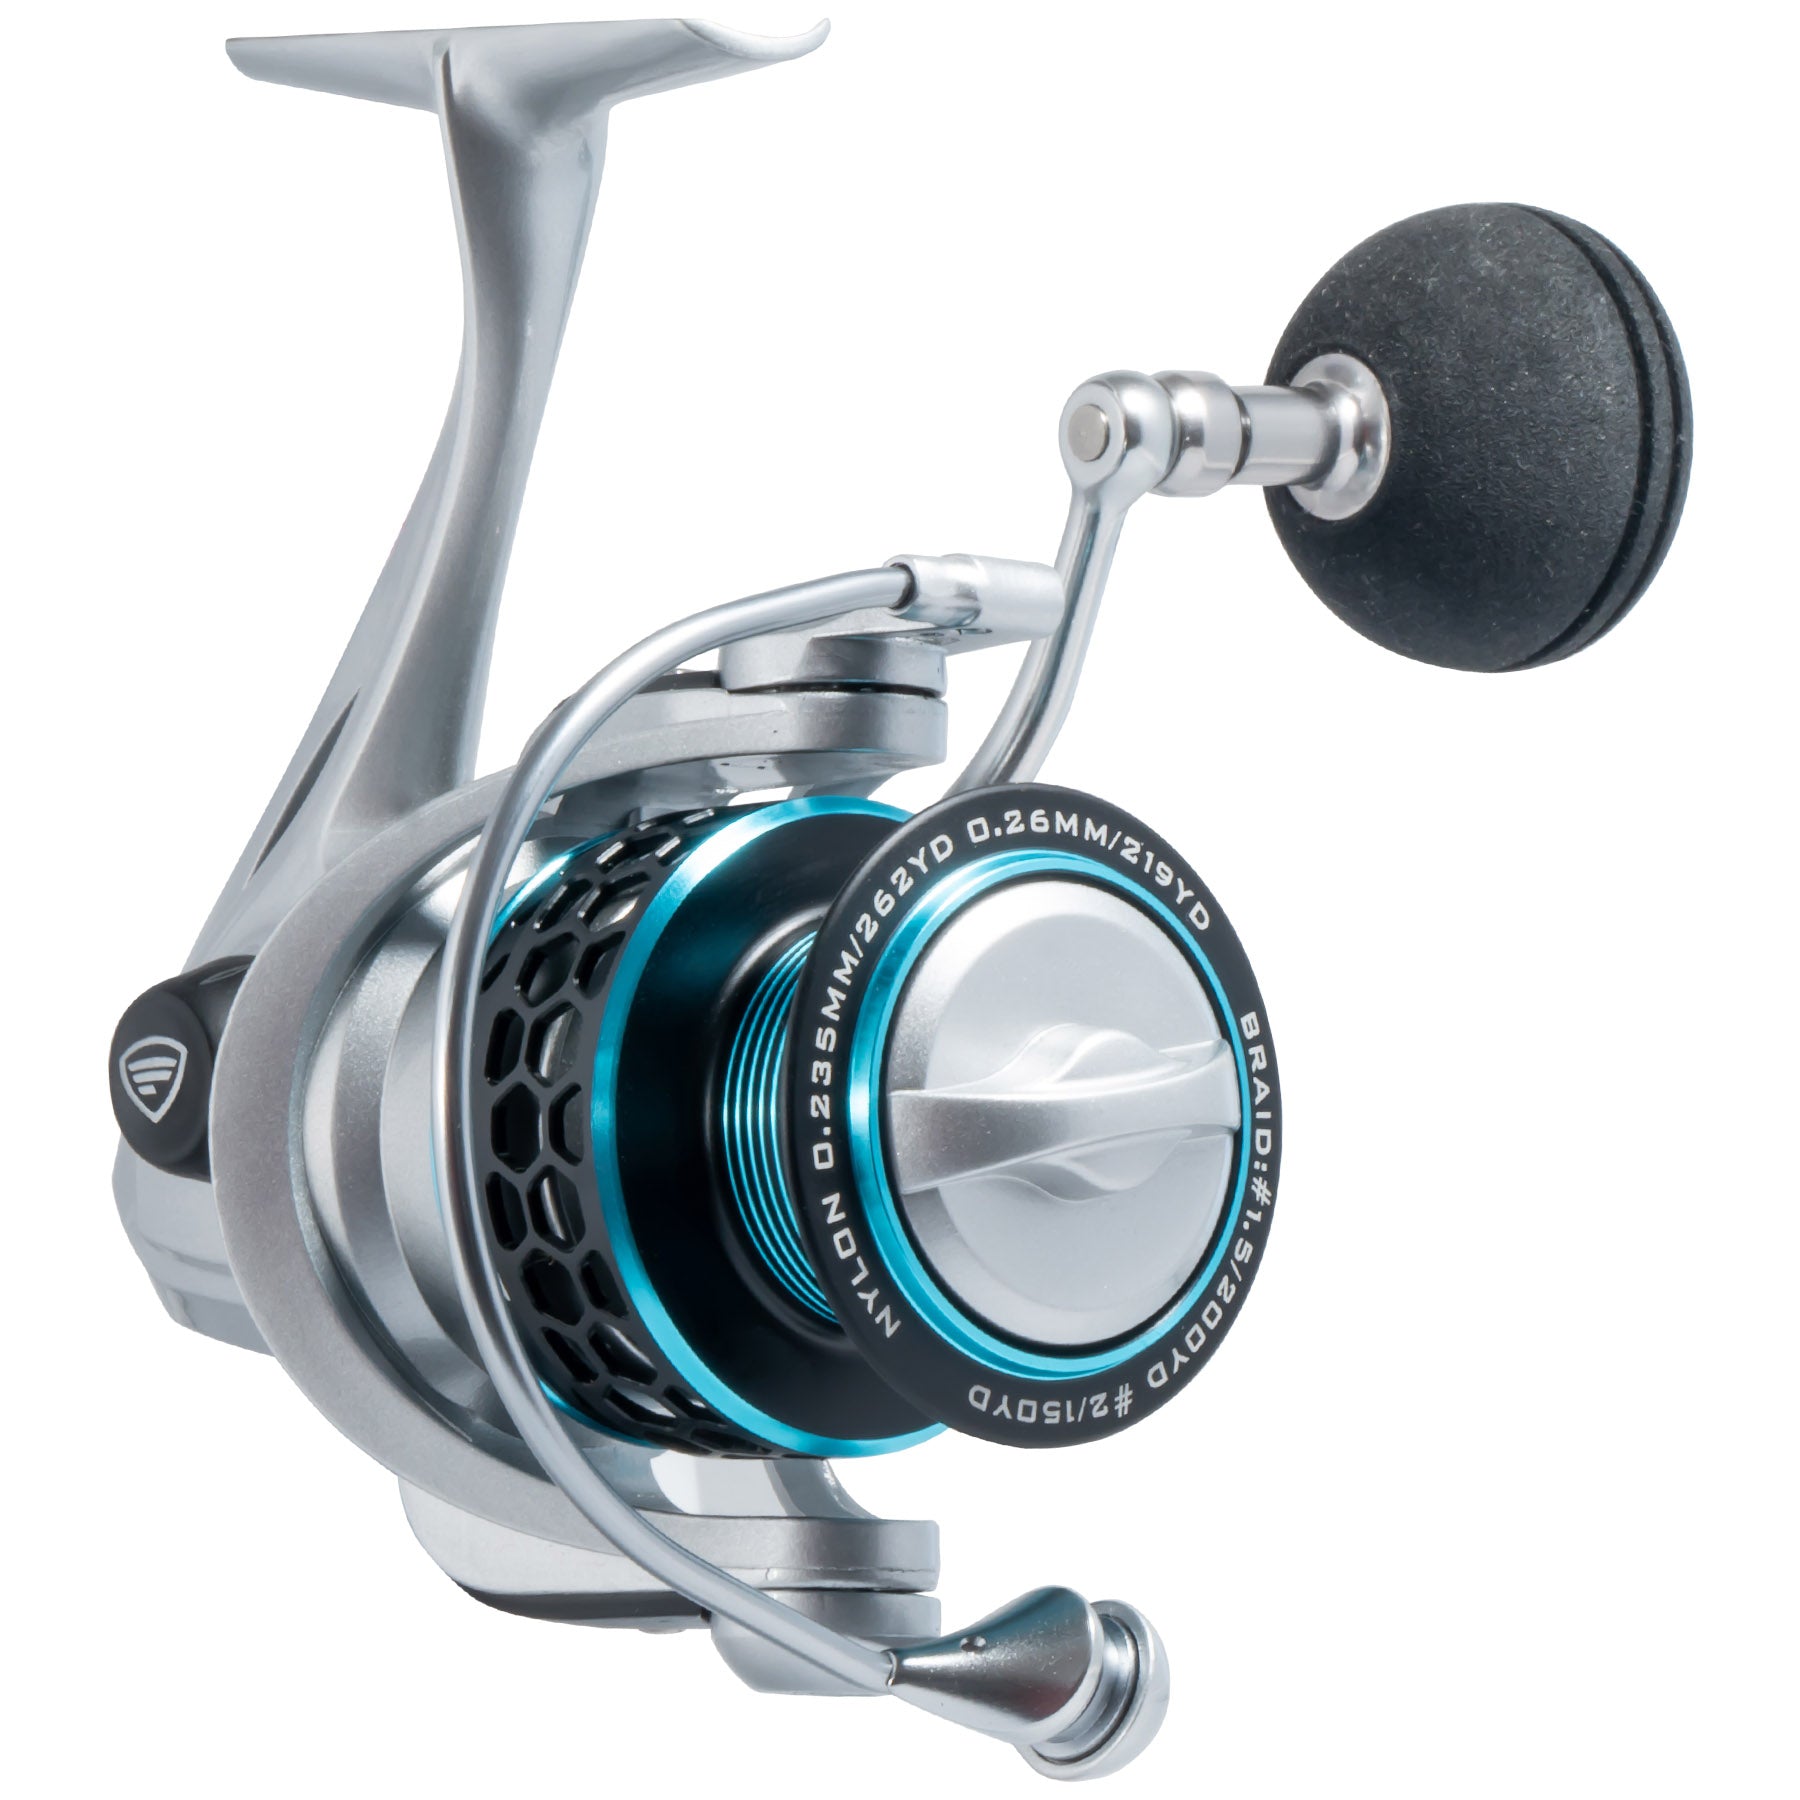 (2) Large Capacity Spinning Reels